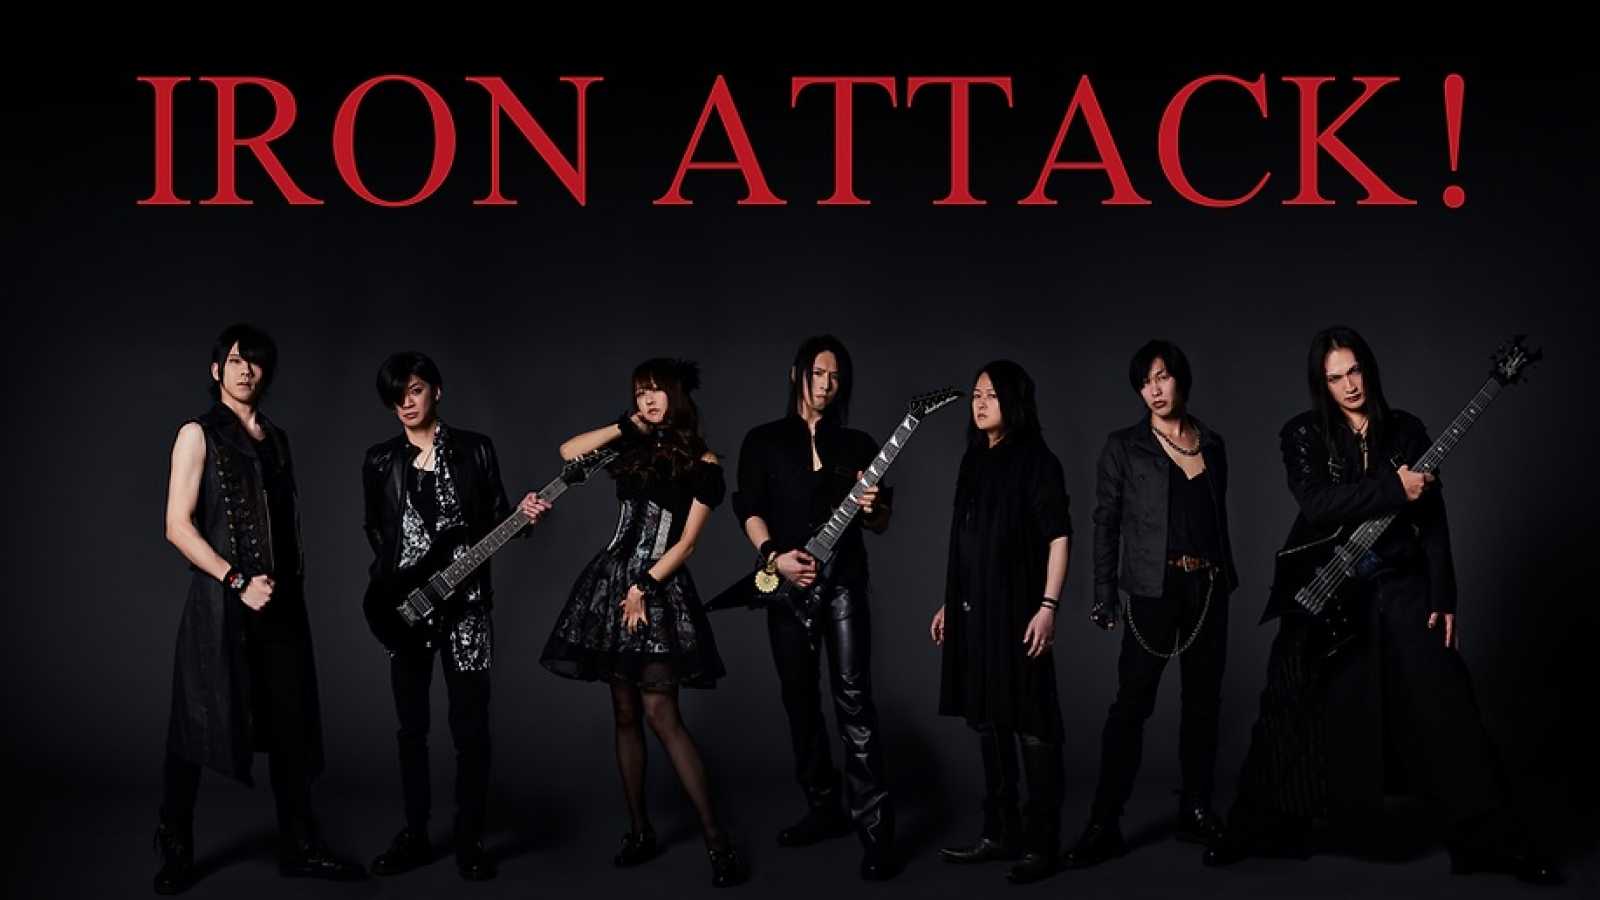 IRON ATTACK! © IRON ATTACK!. All rights reserved.